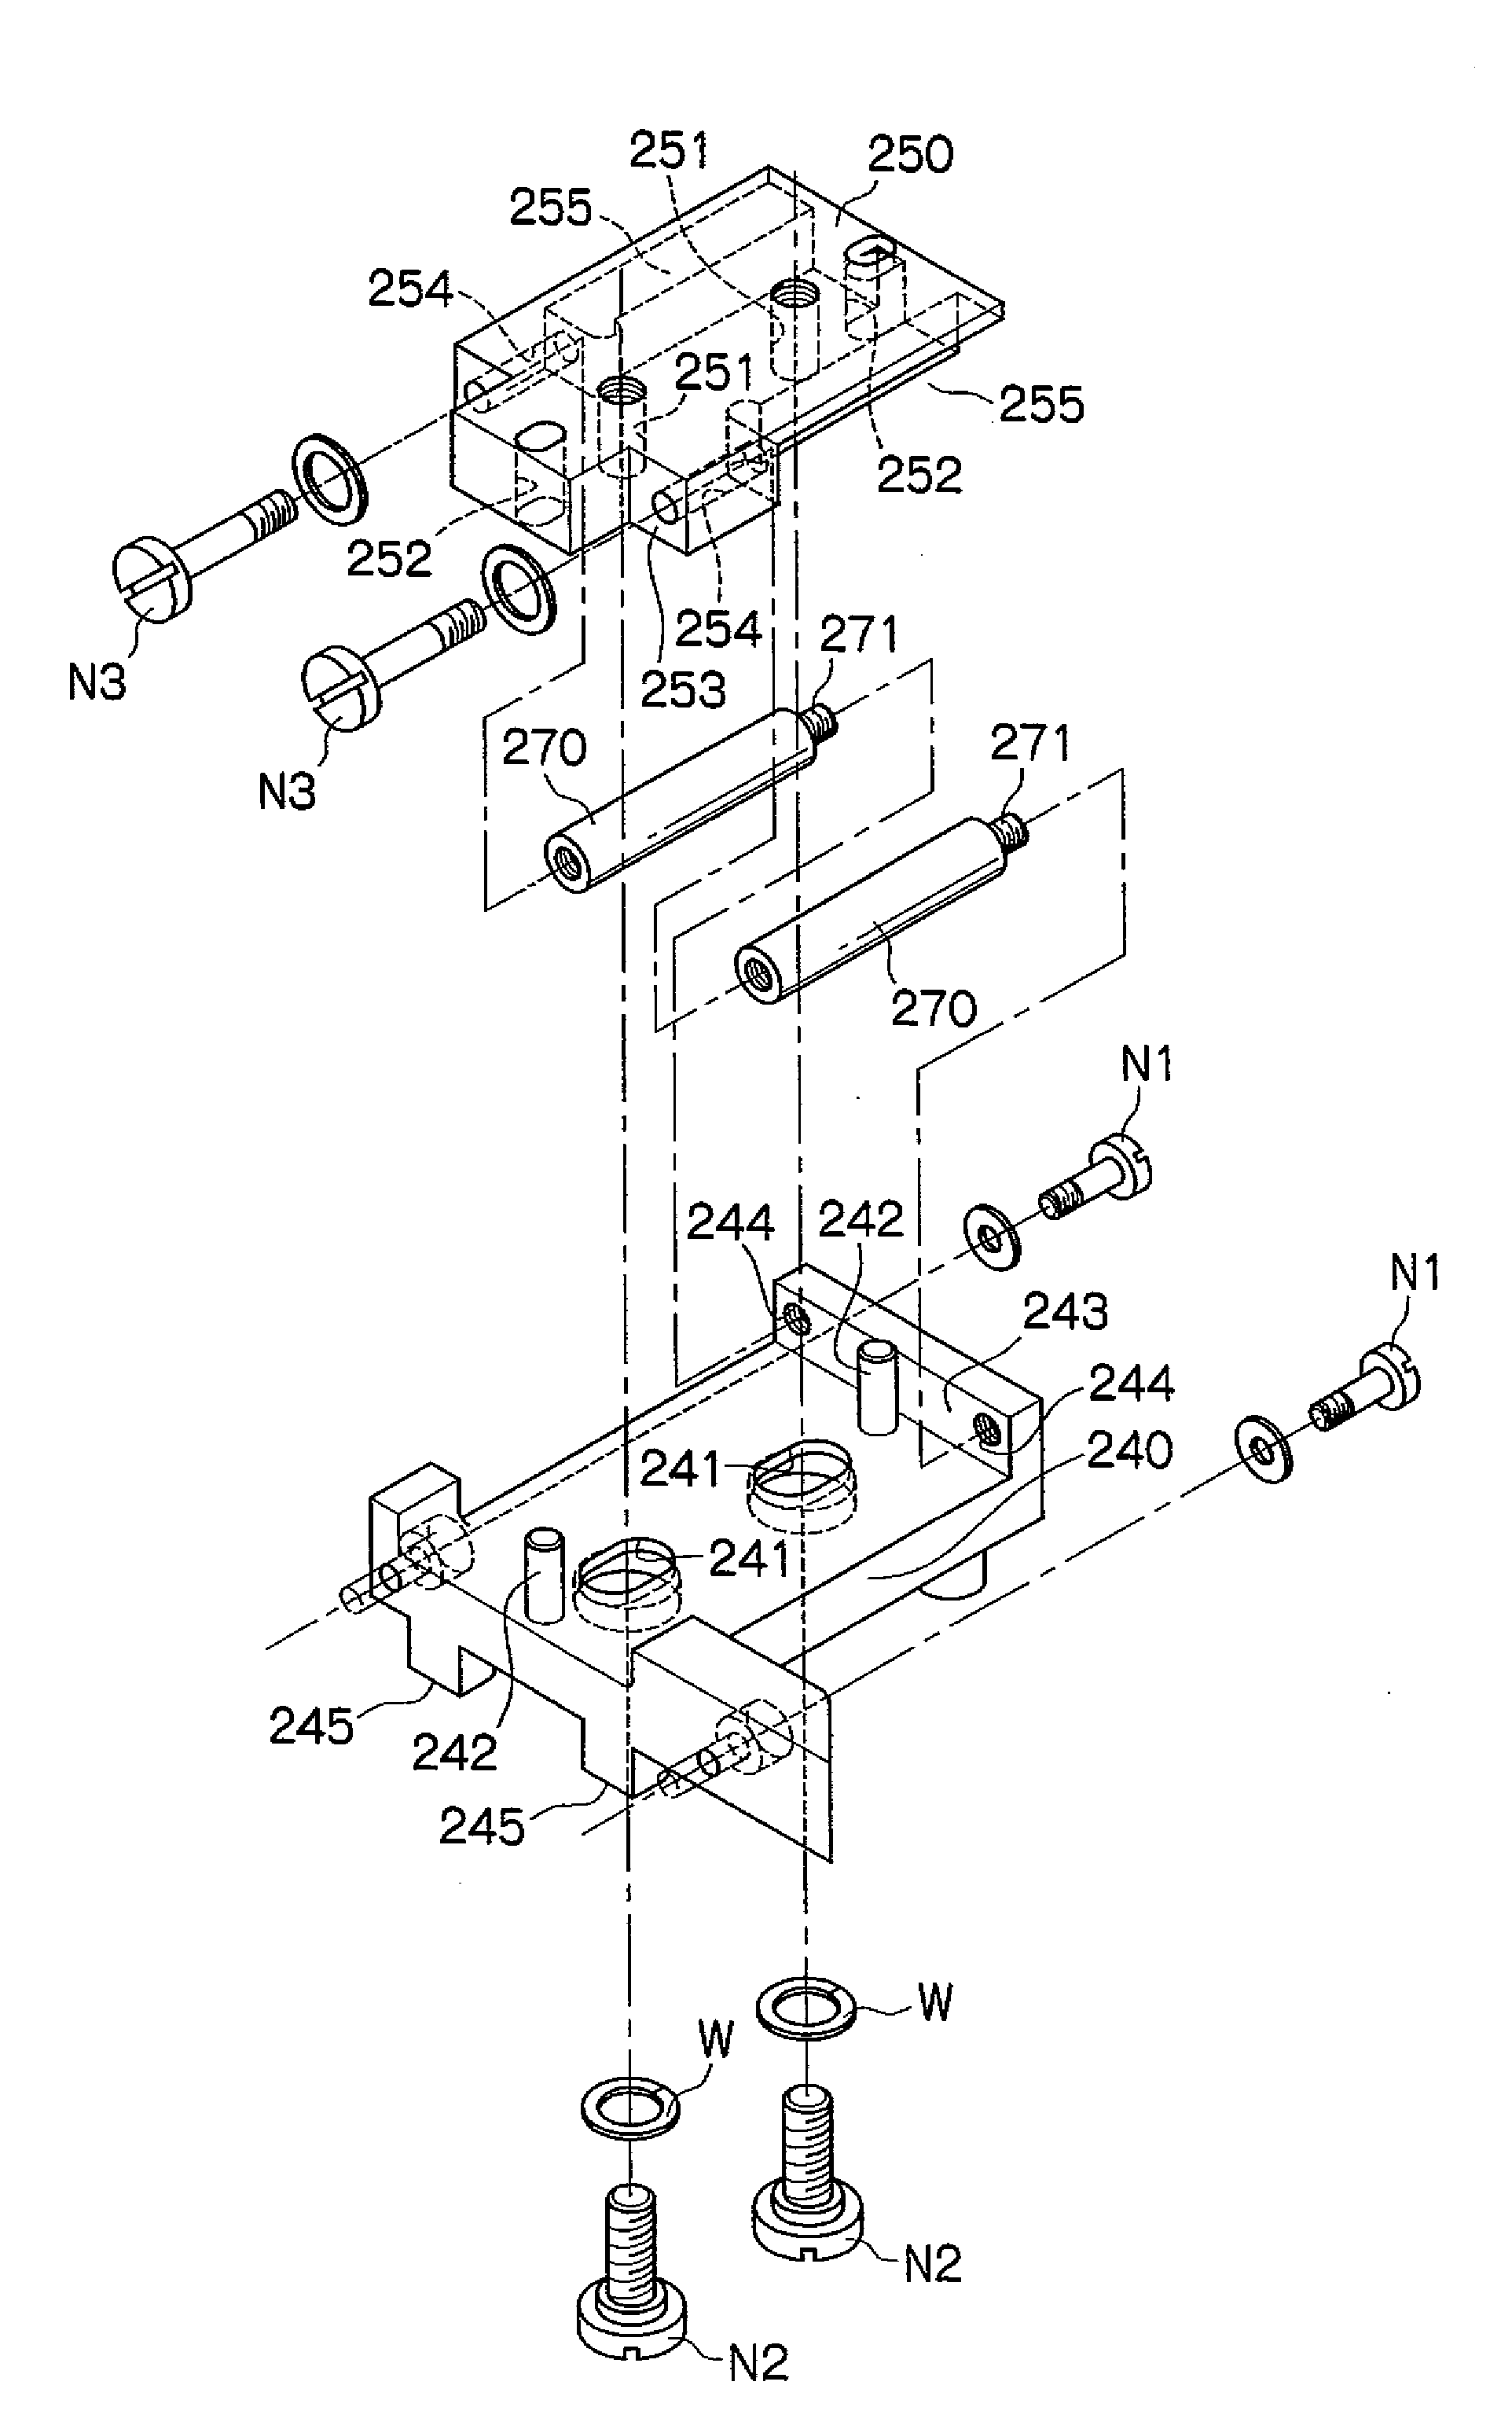 Movement preventing structure for color separation prism